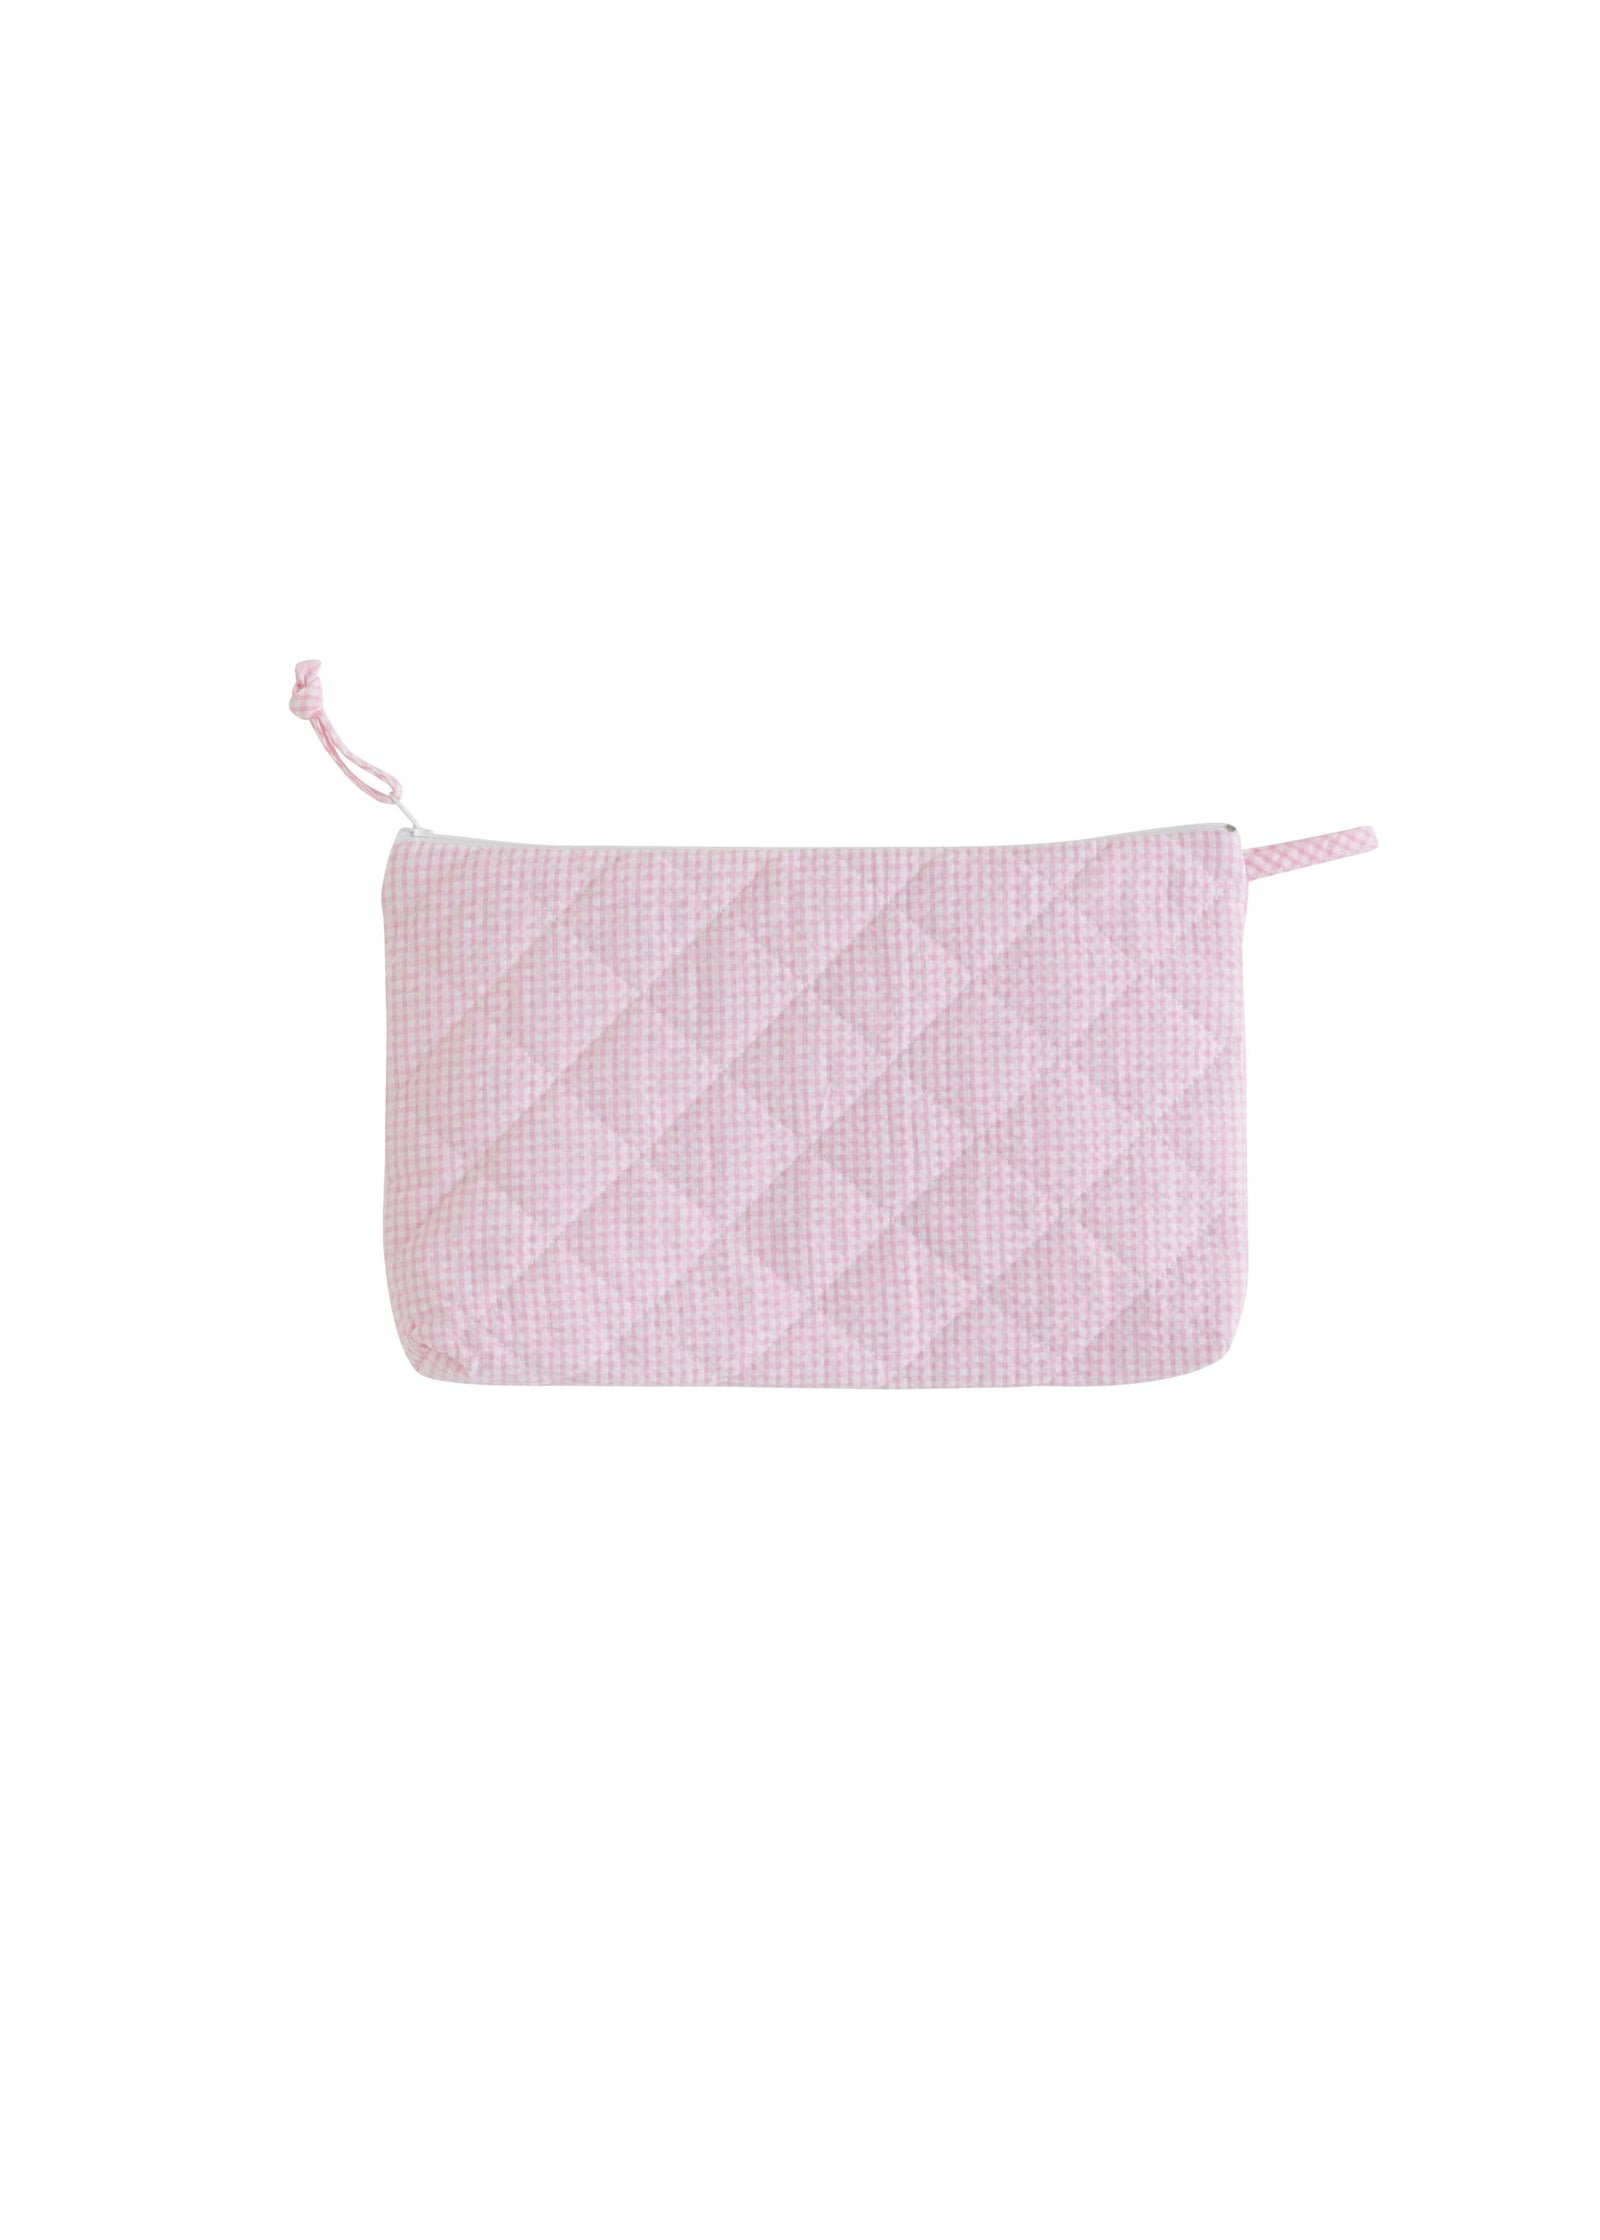 Baby Girl Luggage - Quilted Light Pink